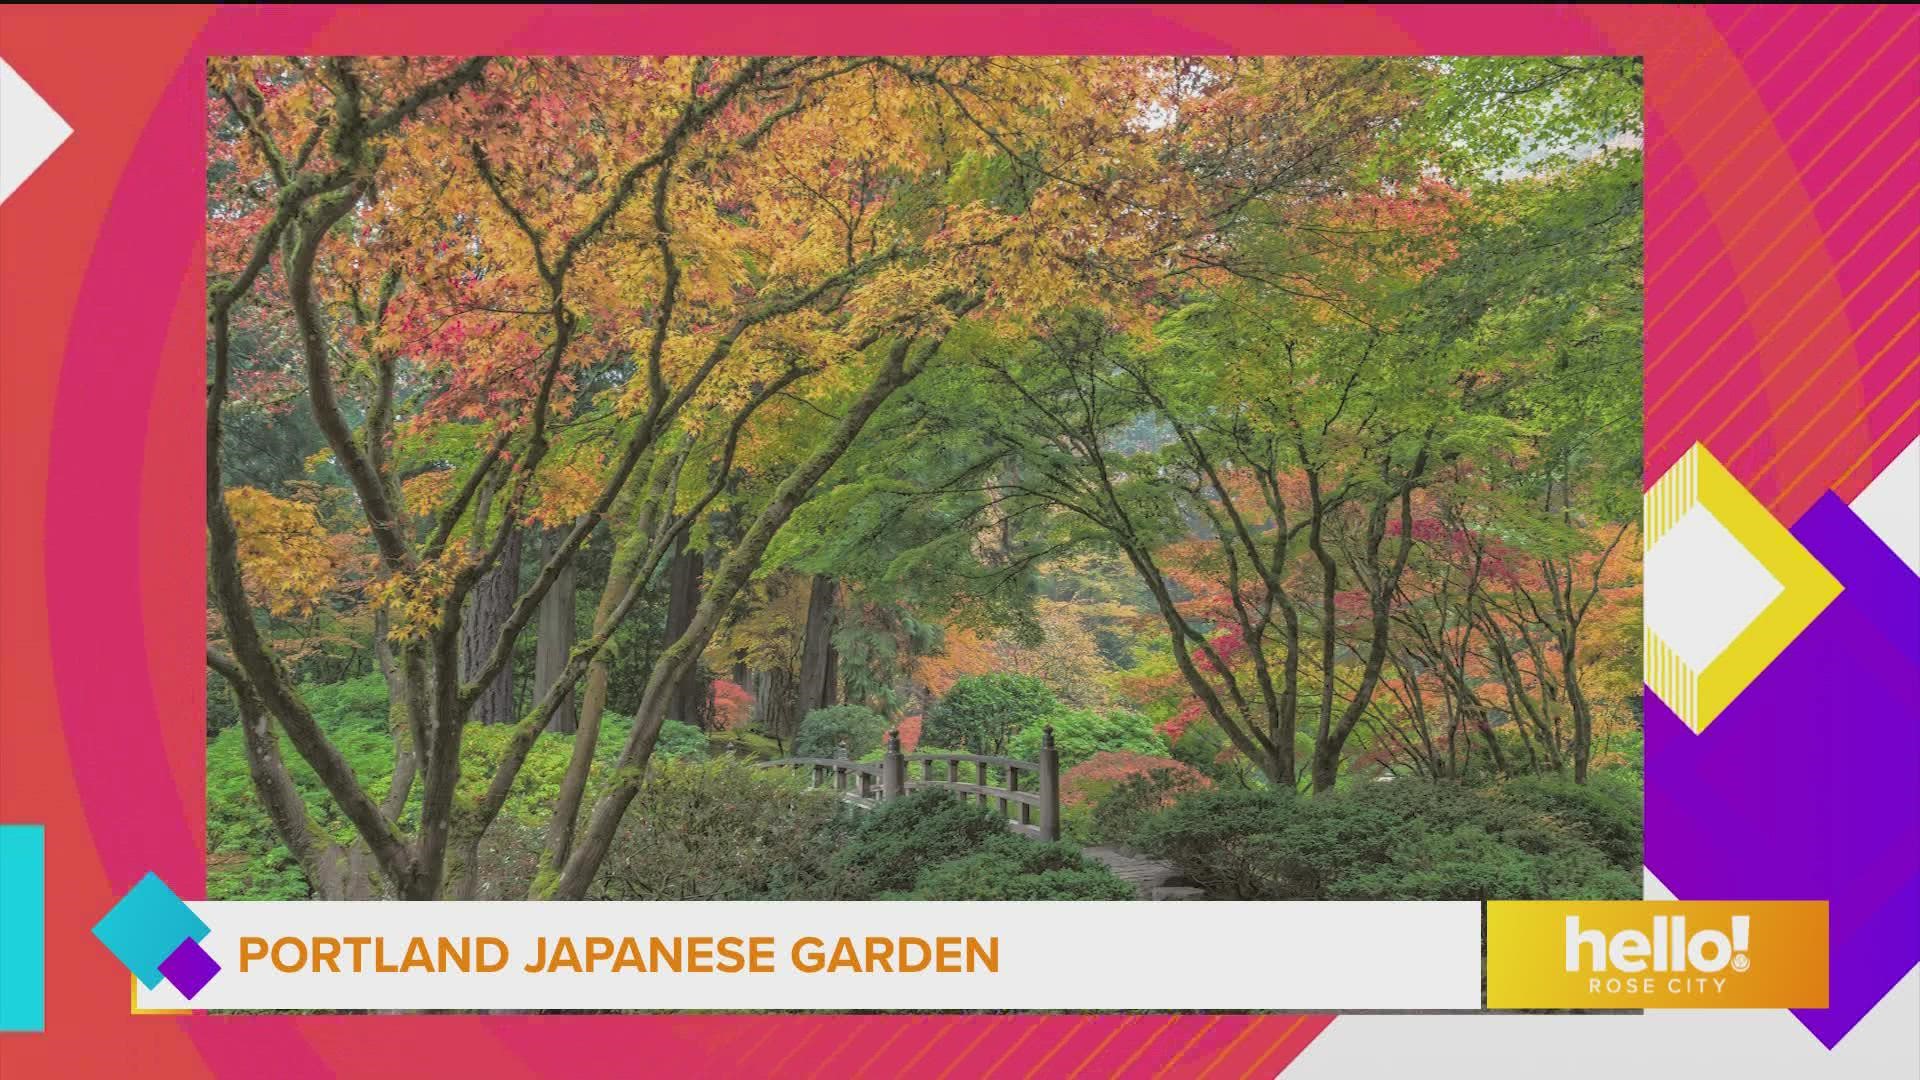 It's an especially beautiful time to visit Portland Japanese Garden and view a special exhibit featuring the art of Jun Kaneko.